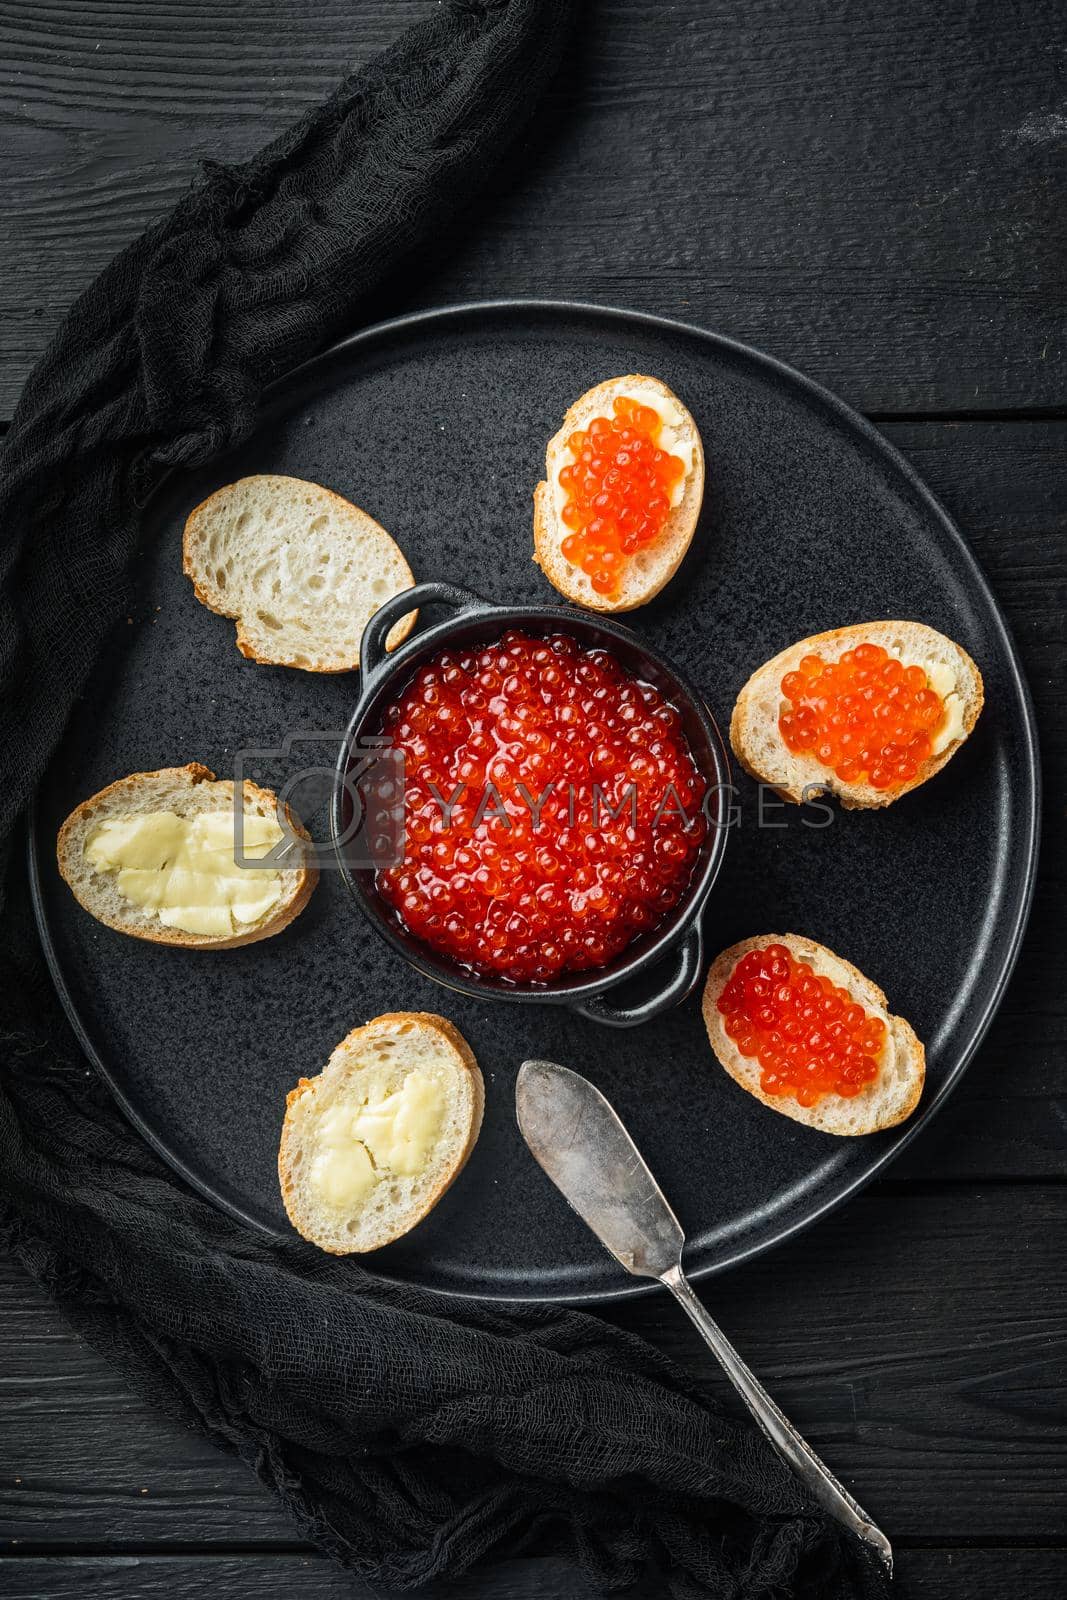 Royalty free image of Canape with Red Salmon Caviar for New Year, on black wooden table background, top view flat lay by Ilianesolenyi